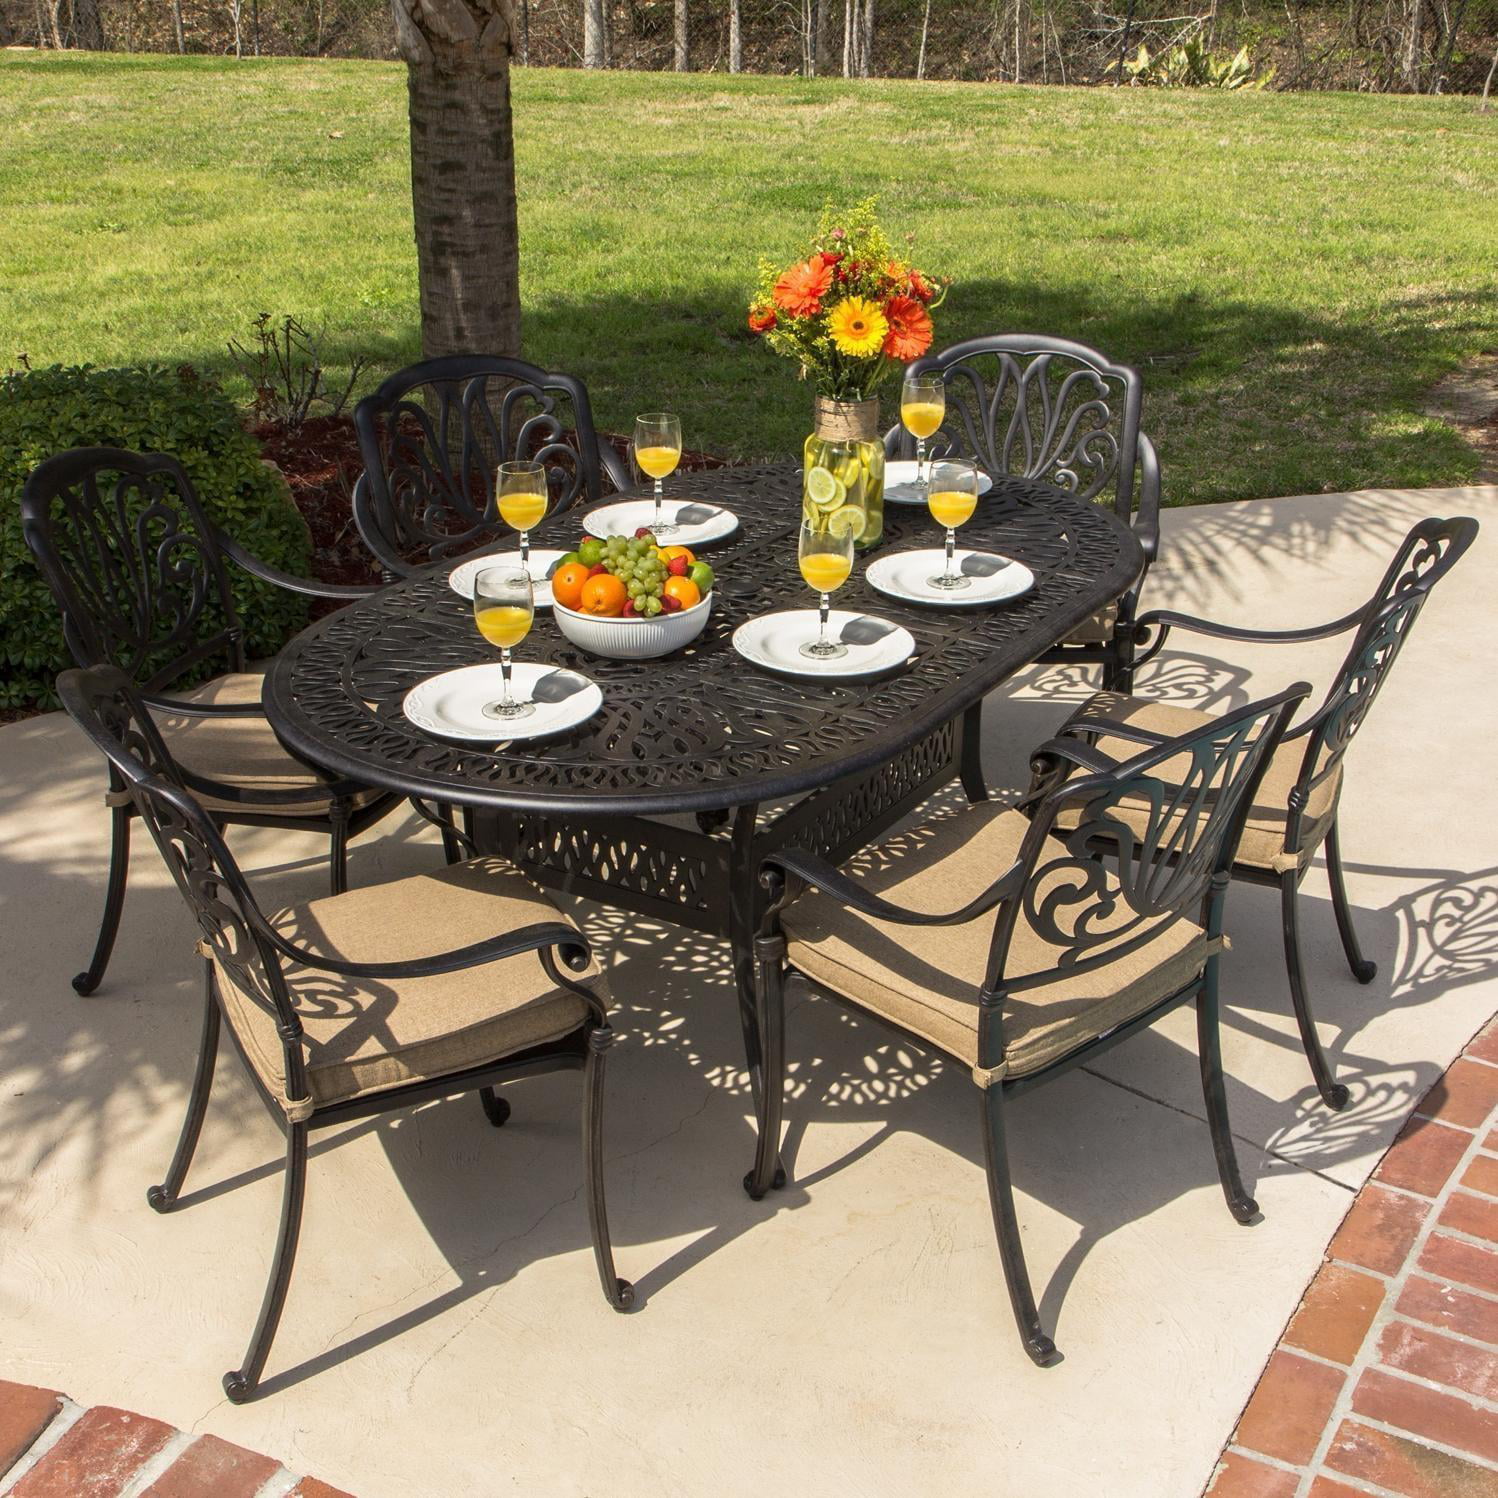 Lakeview Outdoor Designs Rosedown Cast, Wrought Iron Patio Dining Table For 6